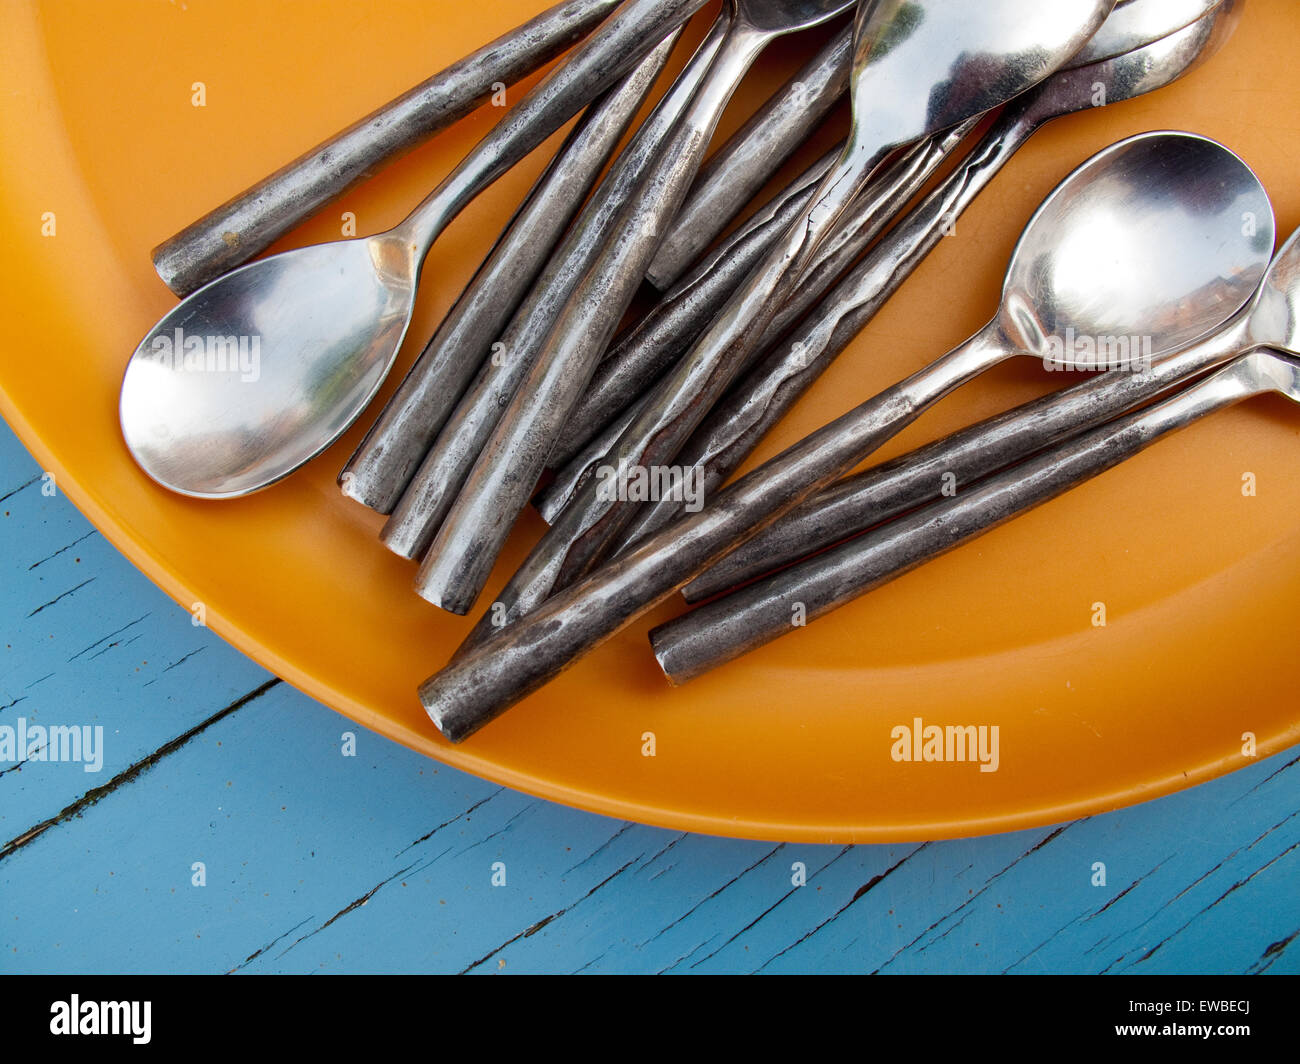 Silver spoons on plate Stock Photo